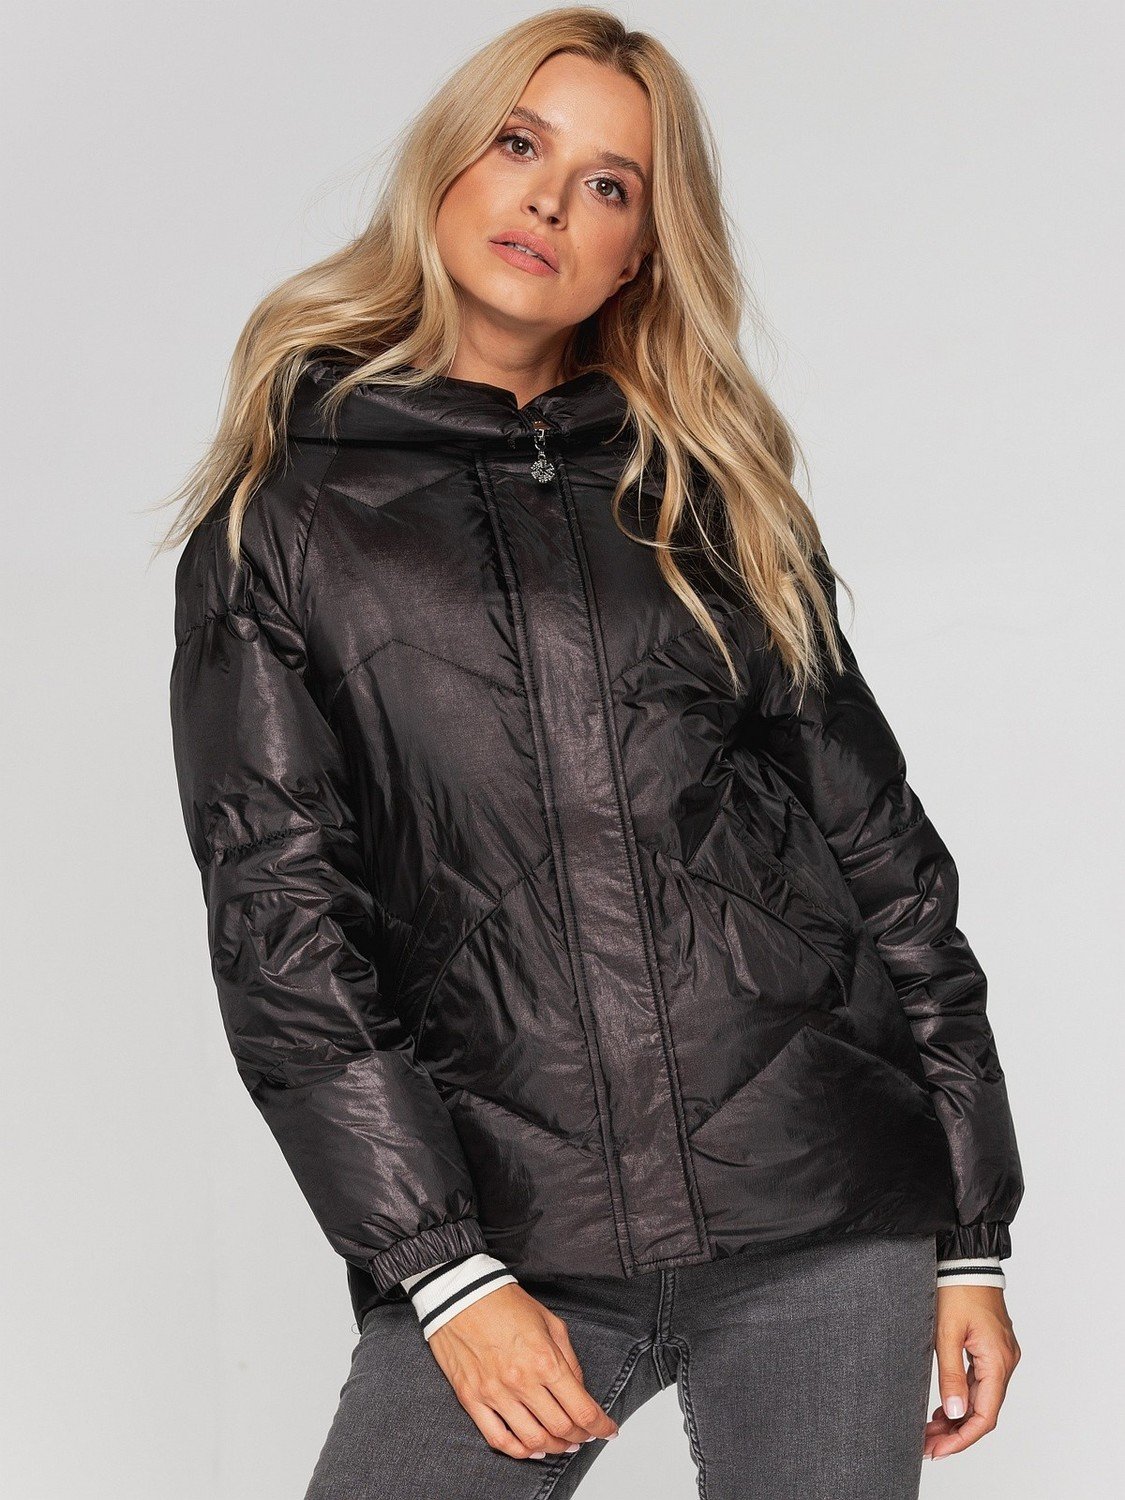 PERSO Woman's Jacket BLH211002F